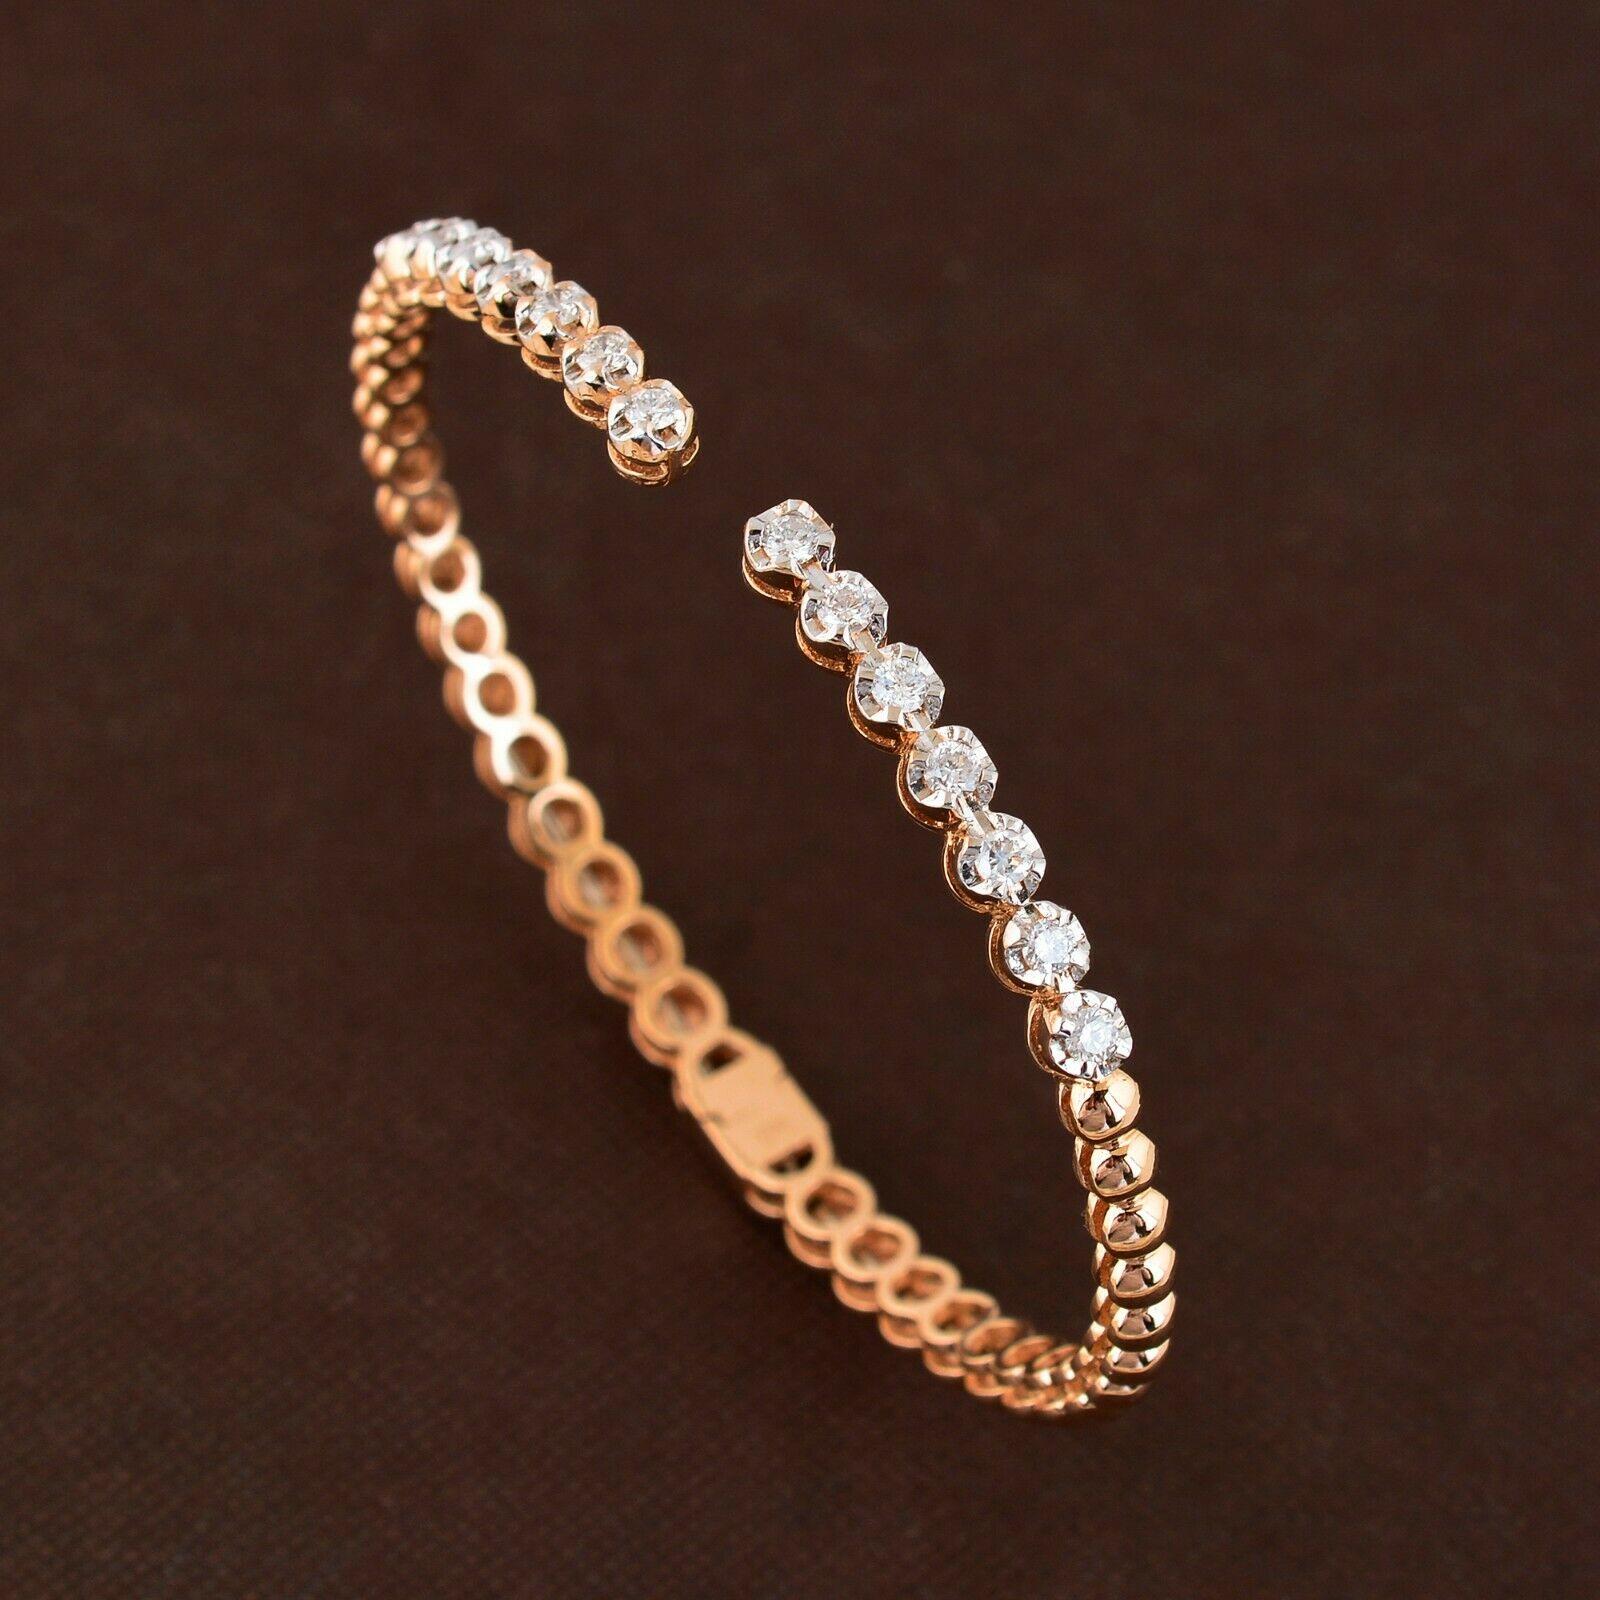 A beautiful bangle handmade in 14K gold and set in .70 carats of sparkling diamonds. 
Wear it alone or stack it with your favorite pieces.

FOLLOW MEGHNA JEWELS storefront to view the latest collection & exclusive pieces. Meghna Jewels is proudly